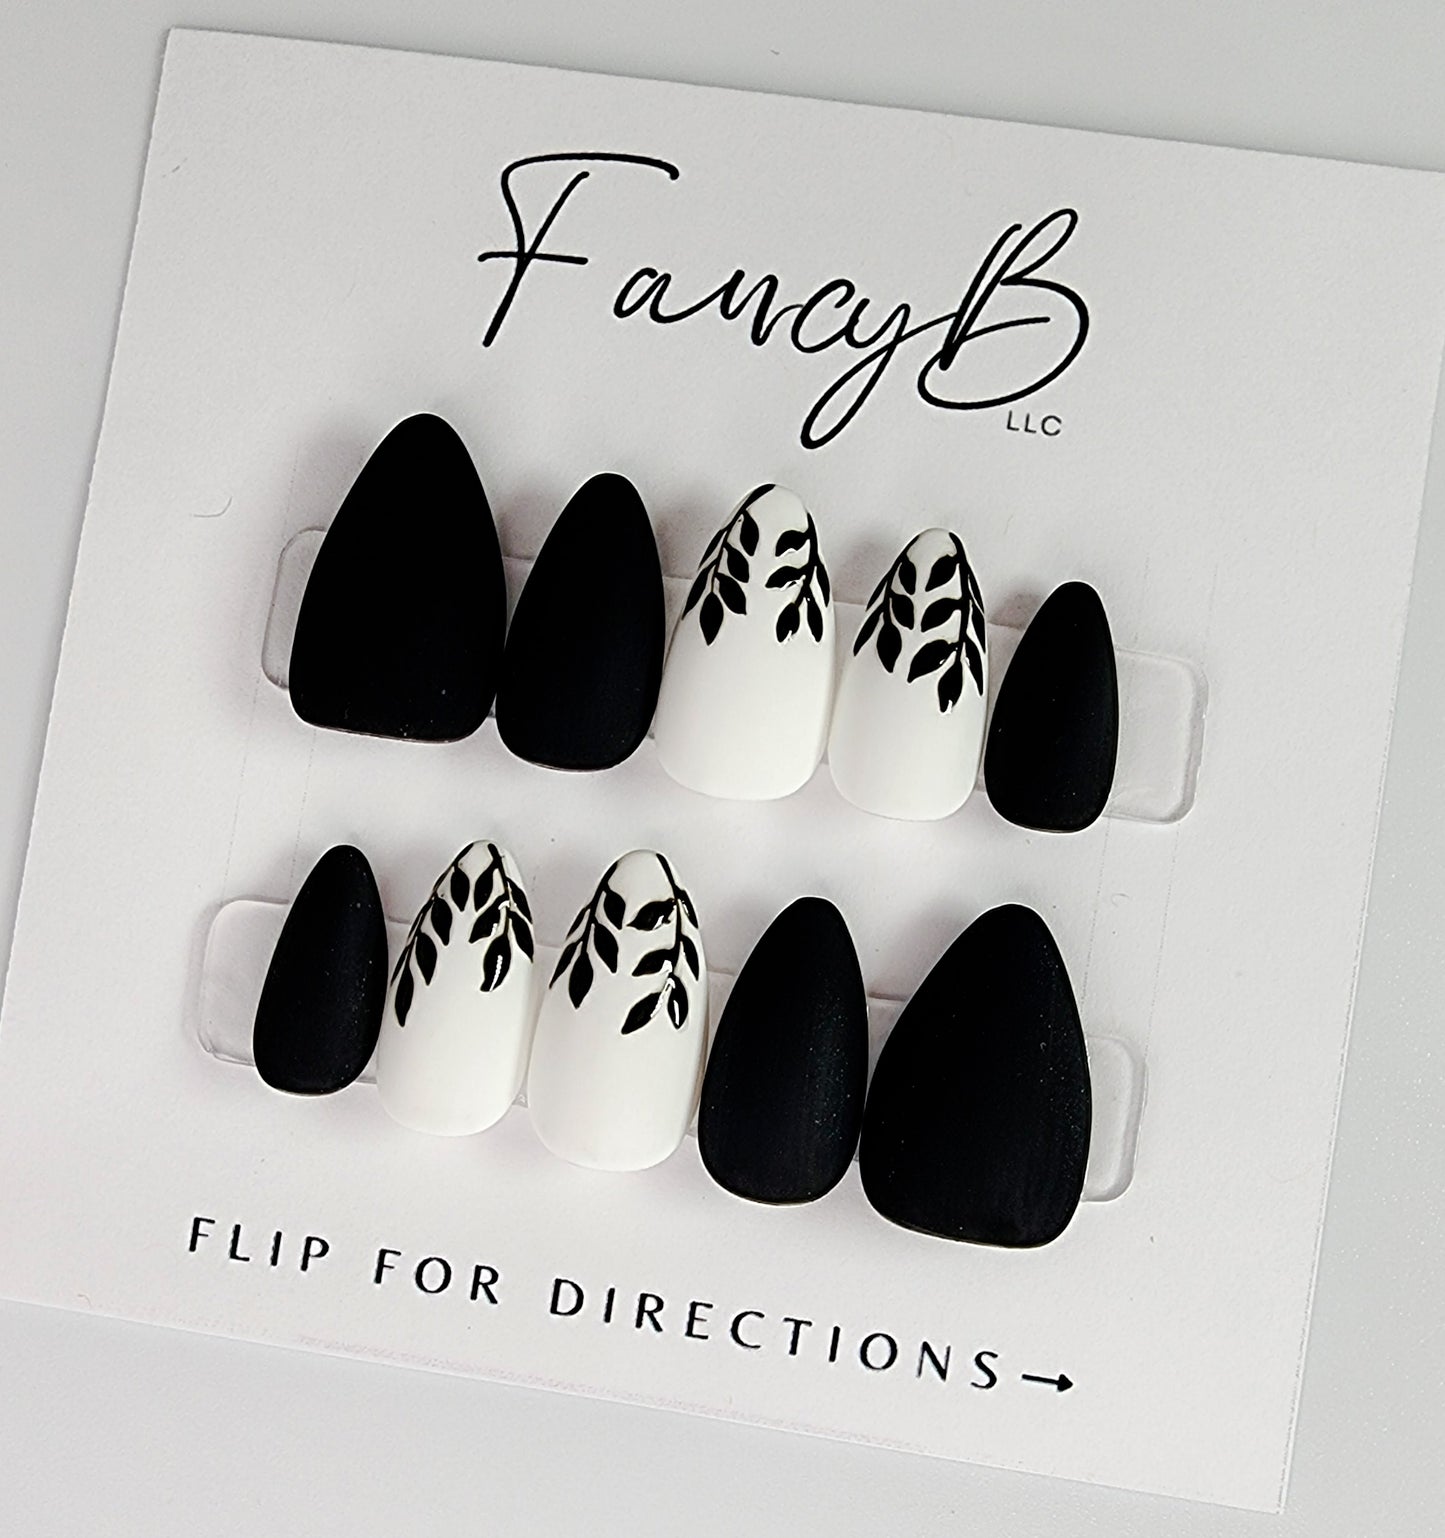 Custom press on nails, matte black and white with gloss black hand painted leaves in a short almond shape. FancyB Nails.